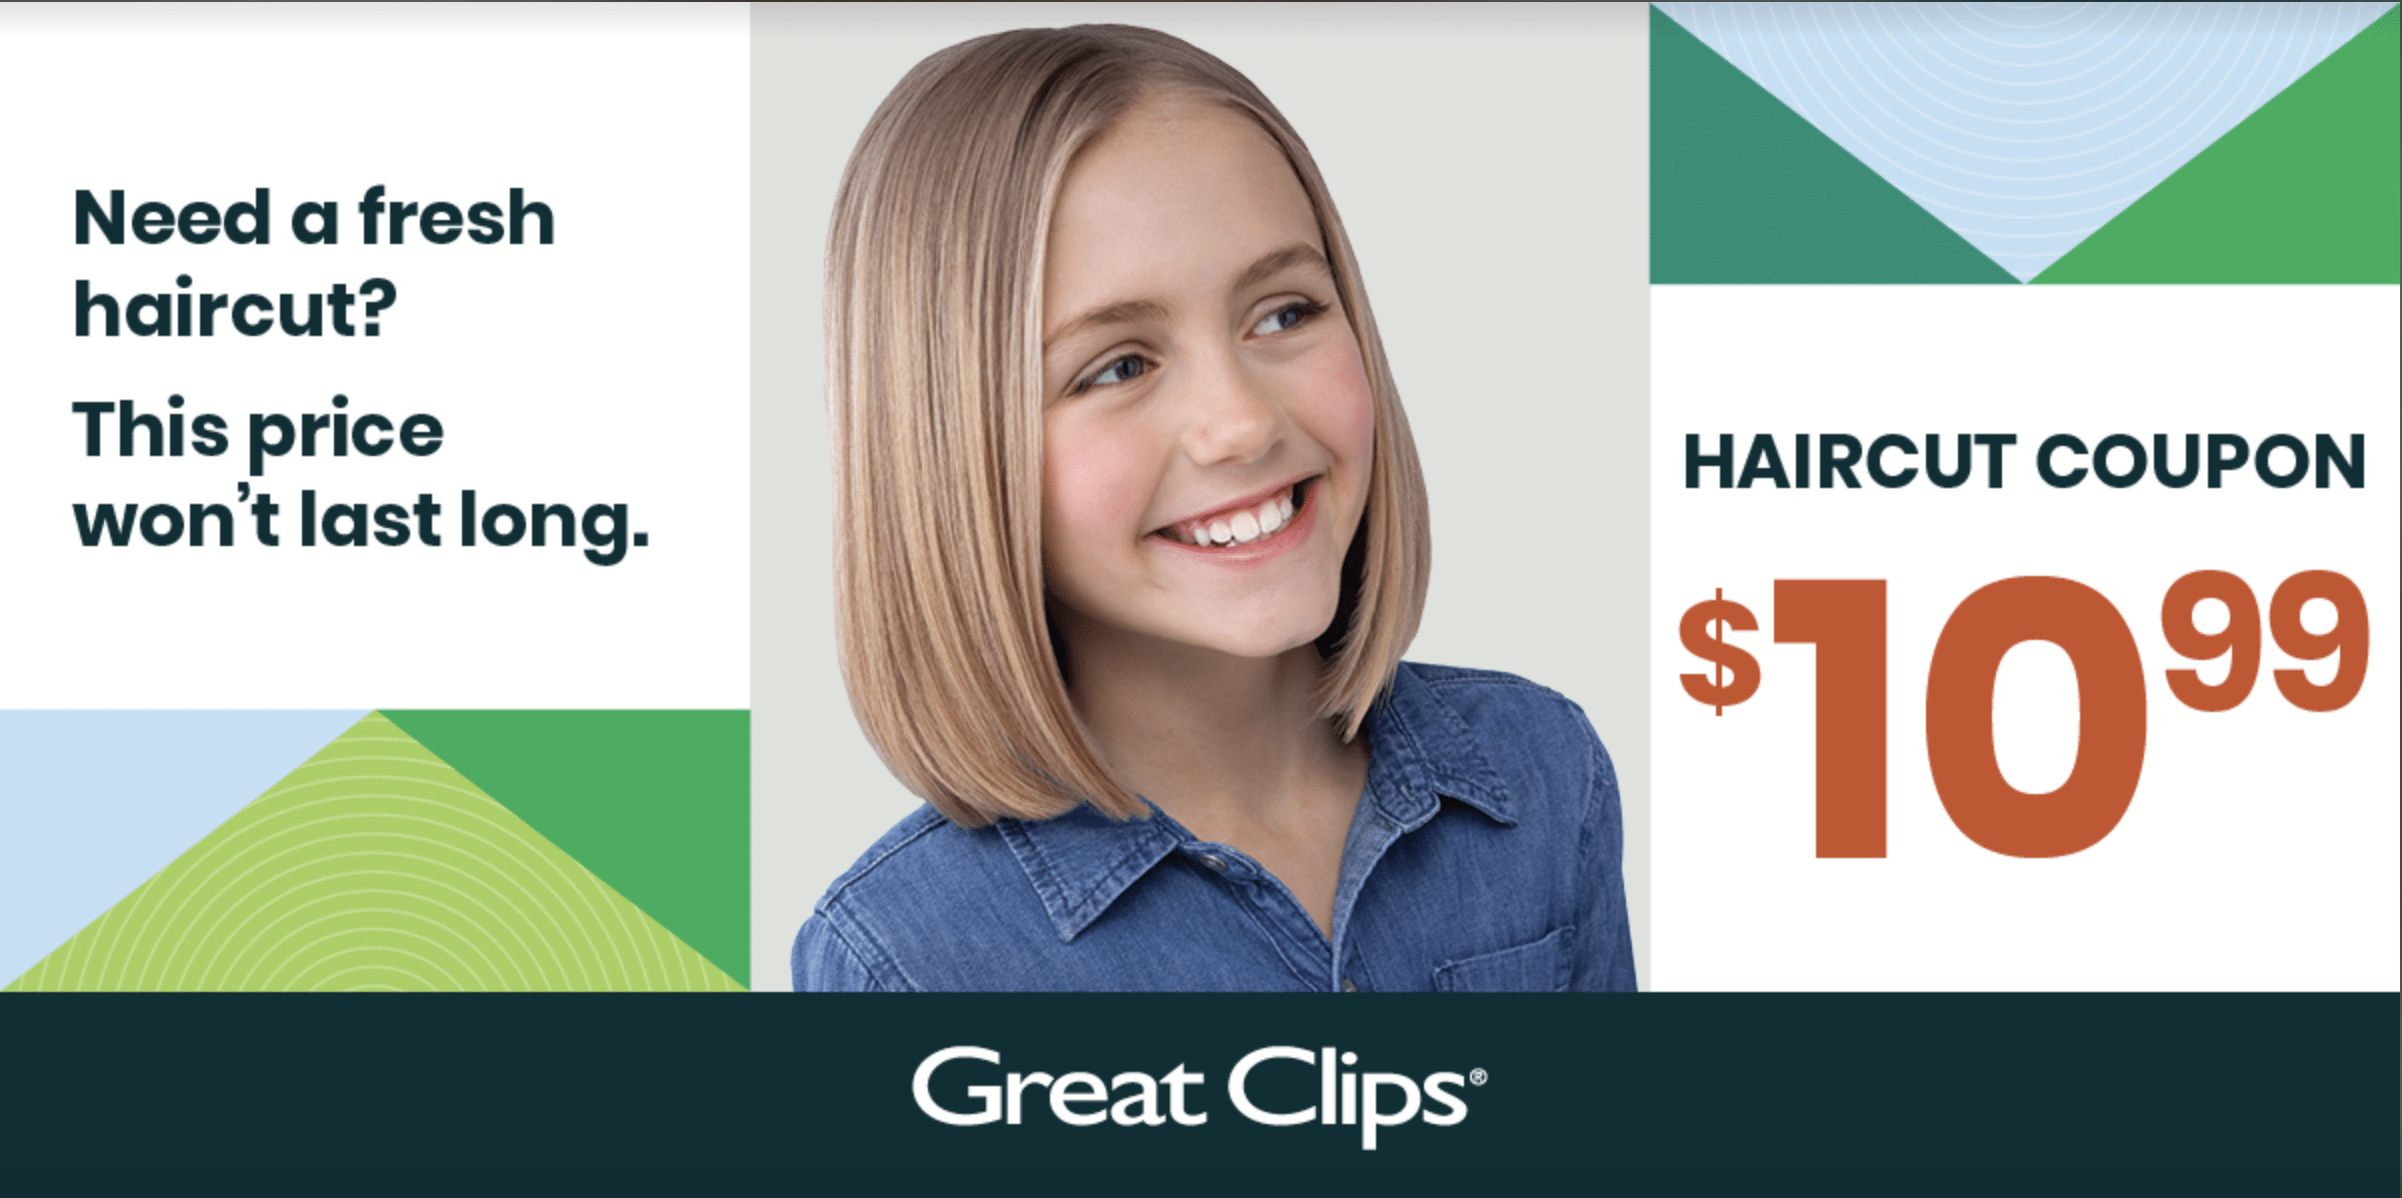 Expired Great Clips Haircut Coupon for 10.99 Deals Finders